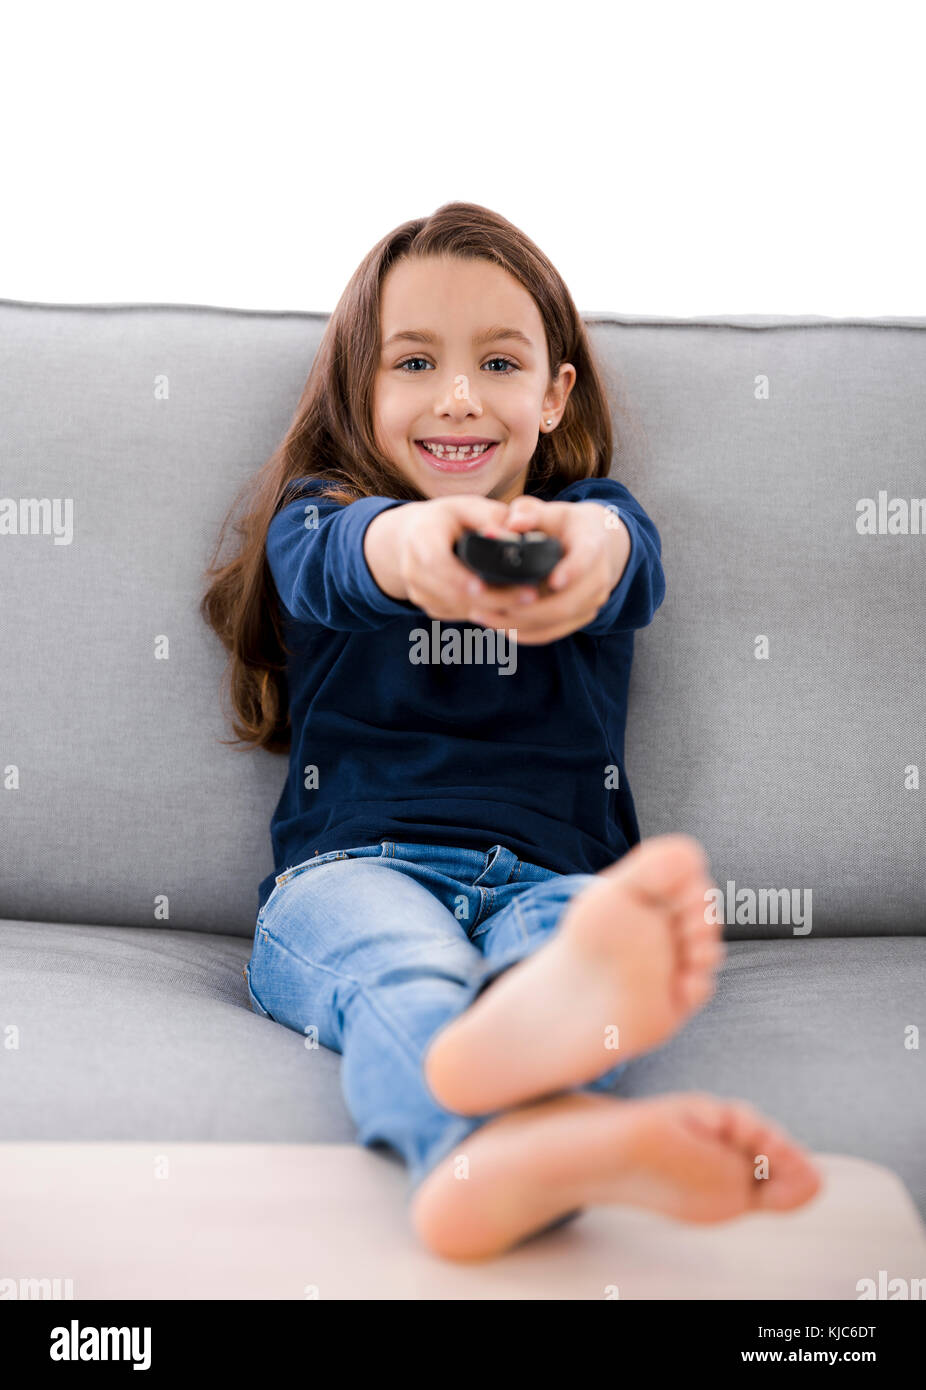 Little girl holding a TV remote control Stock Photo